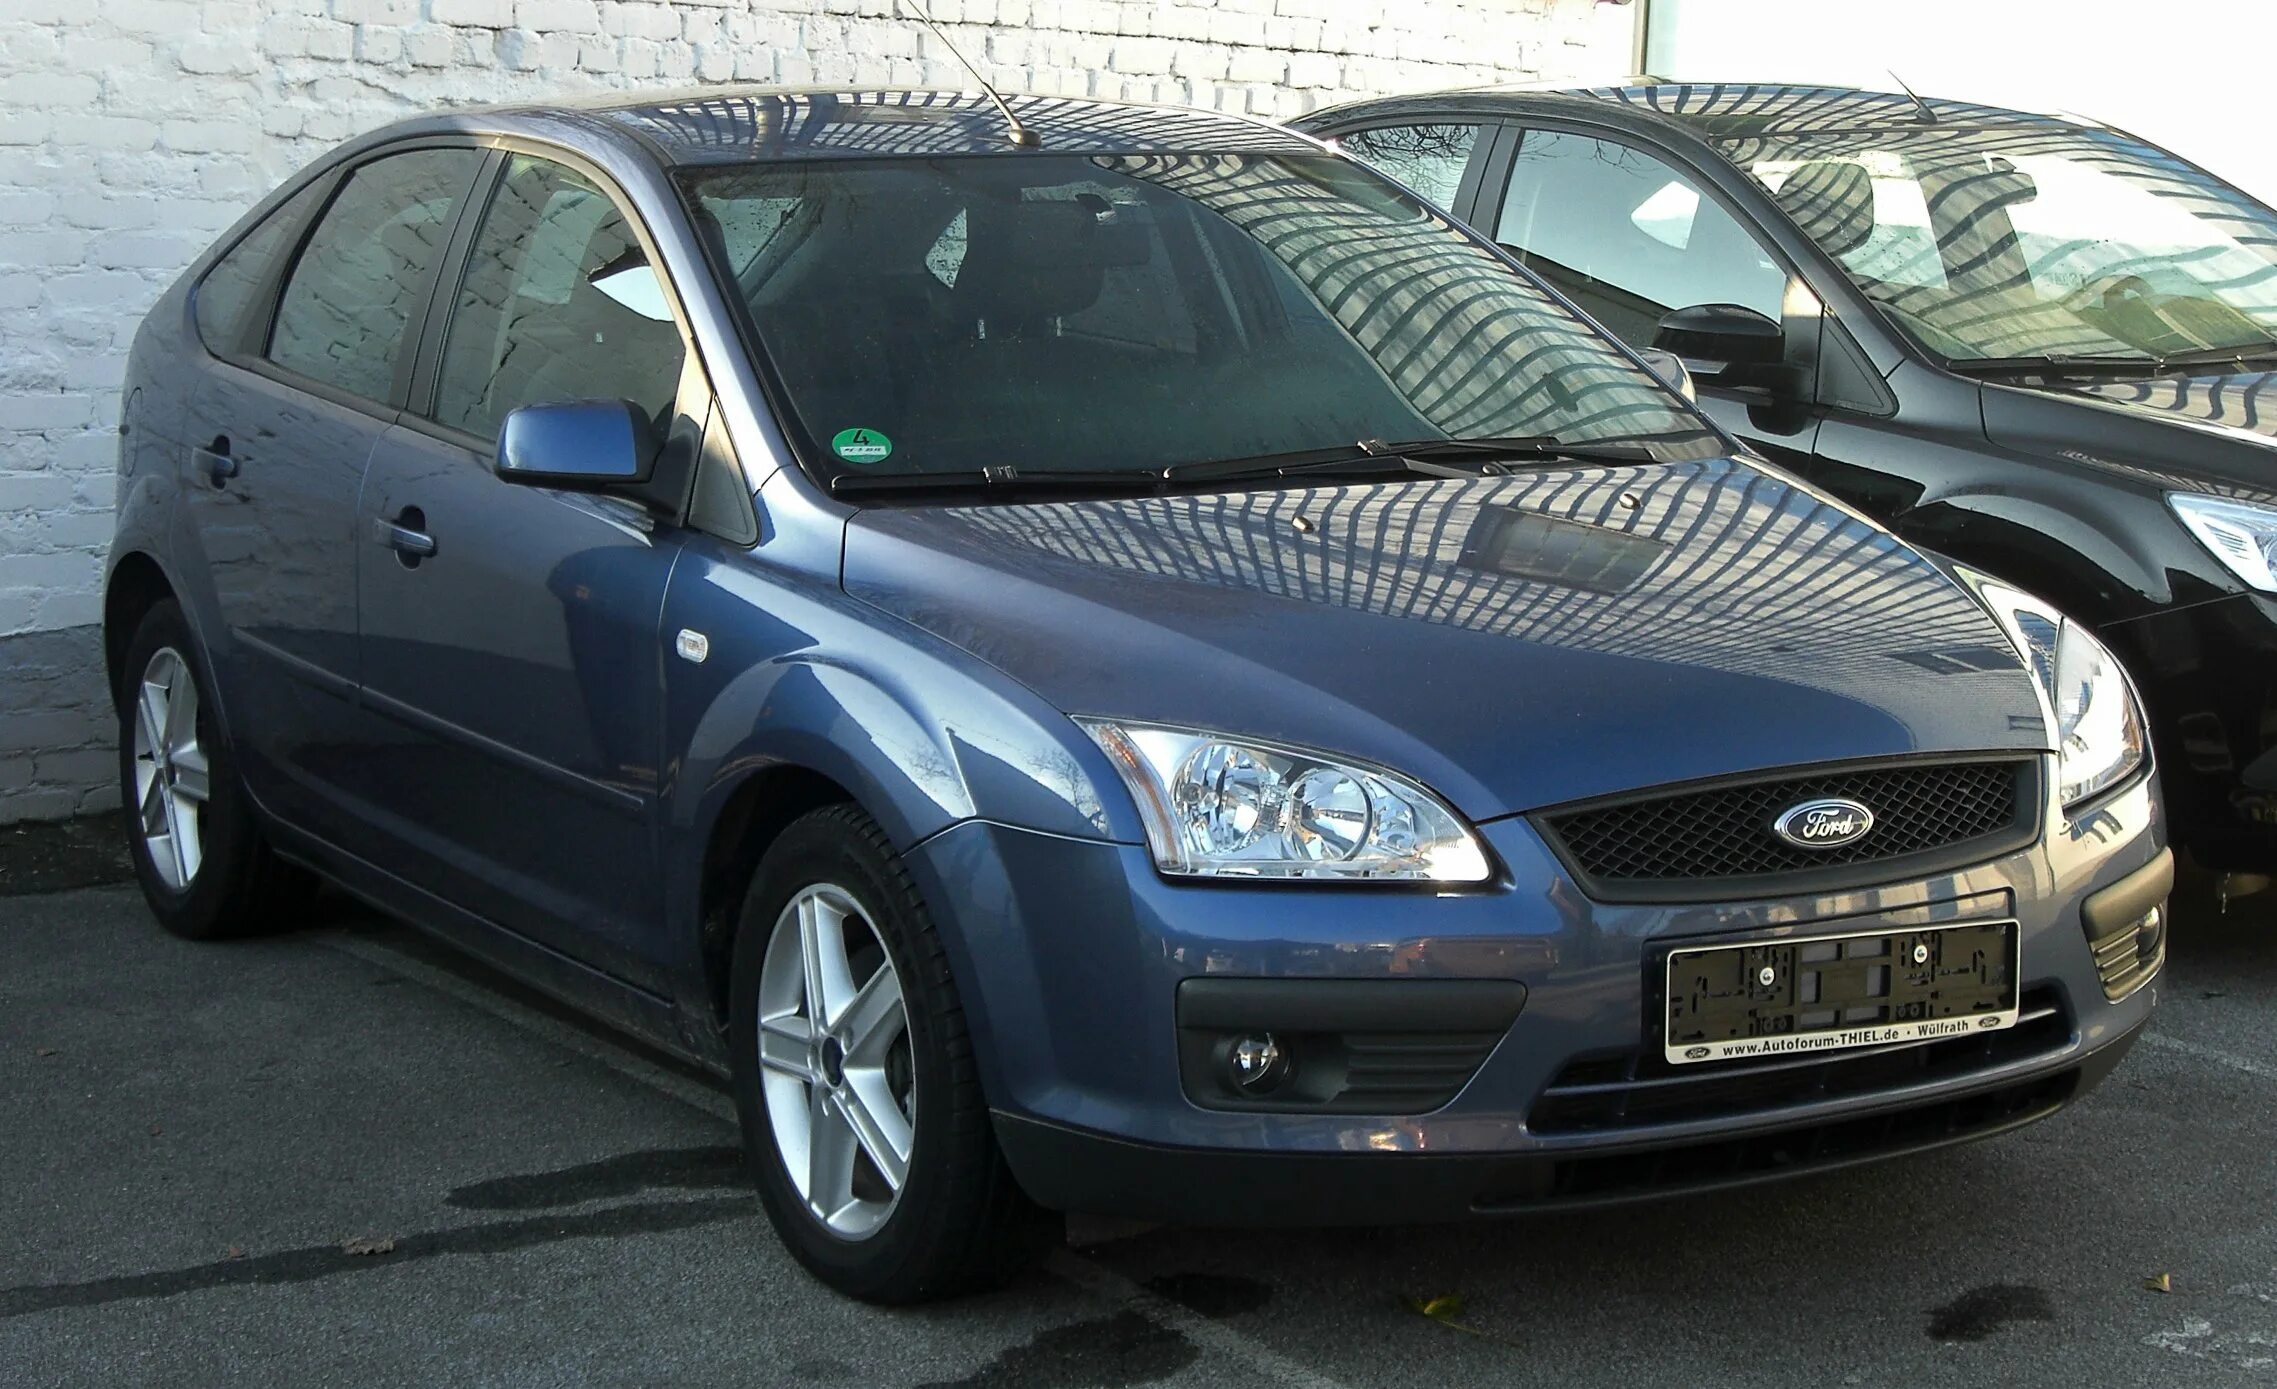 Ford Focus, II, 2005 — 2008, седан. Ford Focus 2 дорестайлинг. Ford Focus 2 дорест. Ford Focus 2 дорестайл.